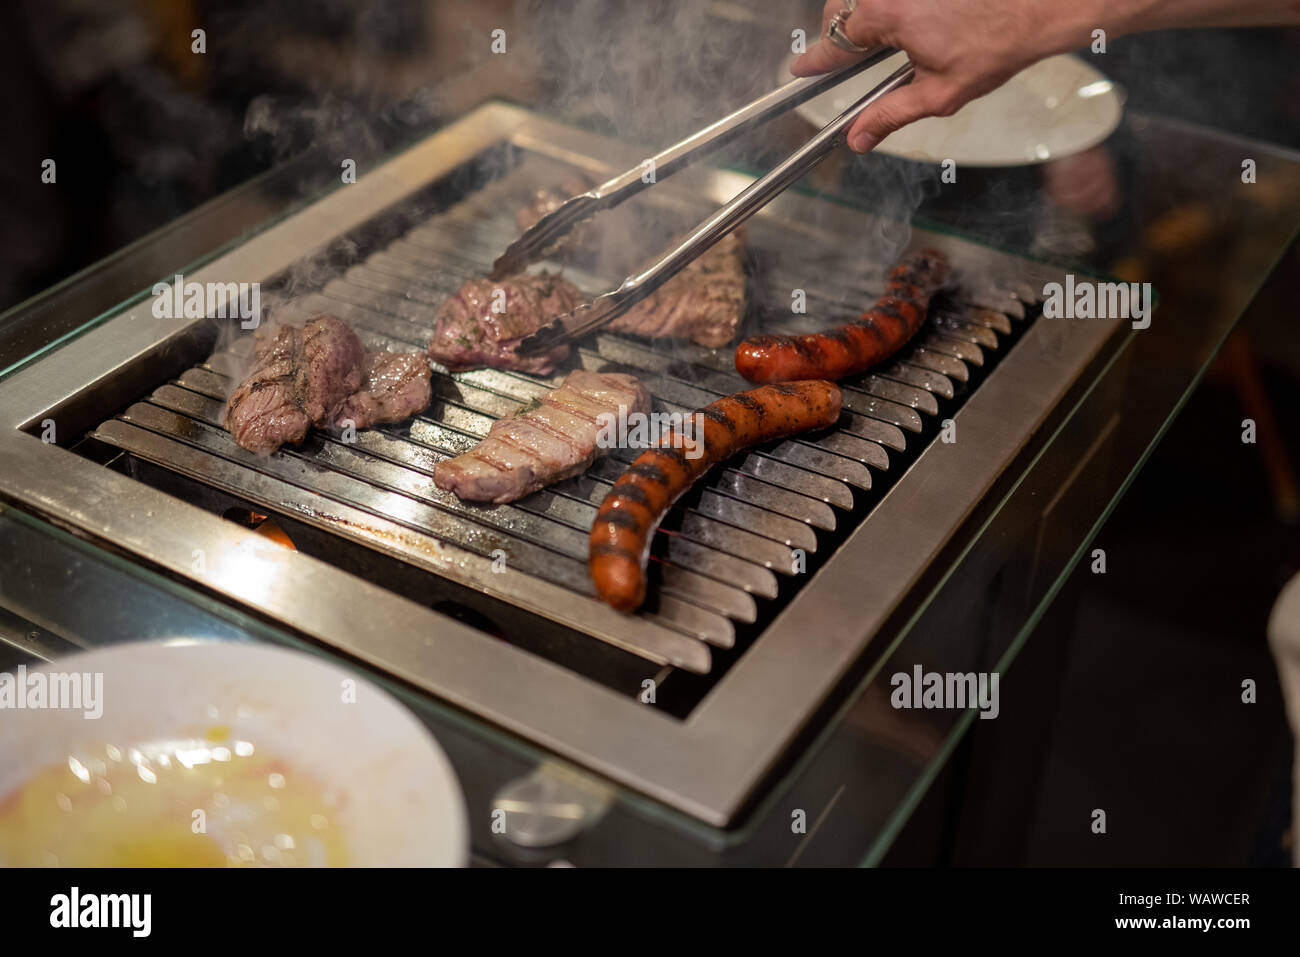 different types of meat, beef steaks and pork sausages, cooked on a grill indoor Stock Photo